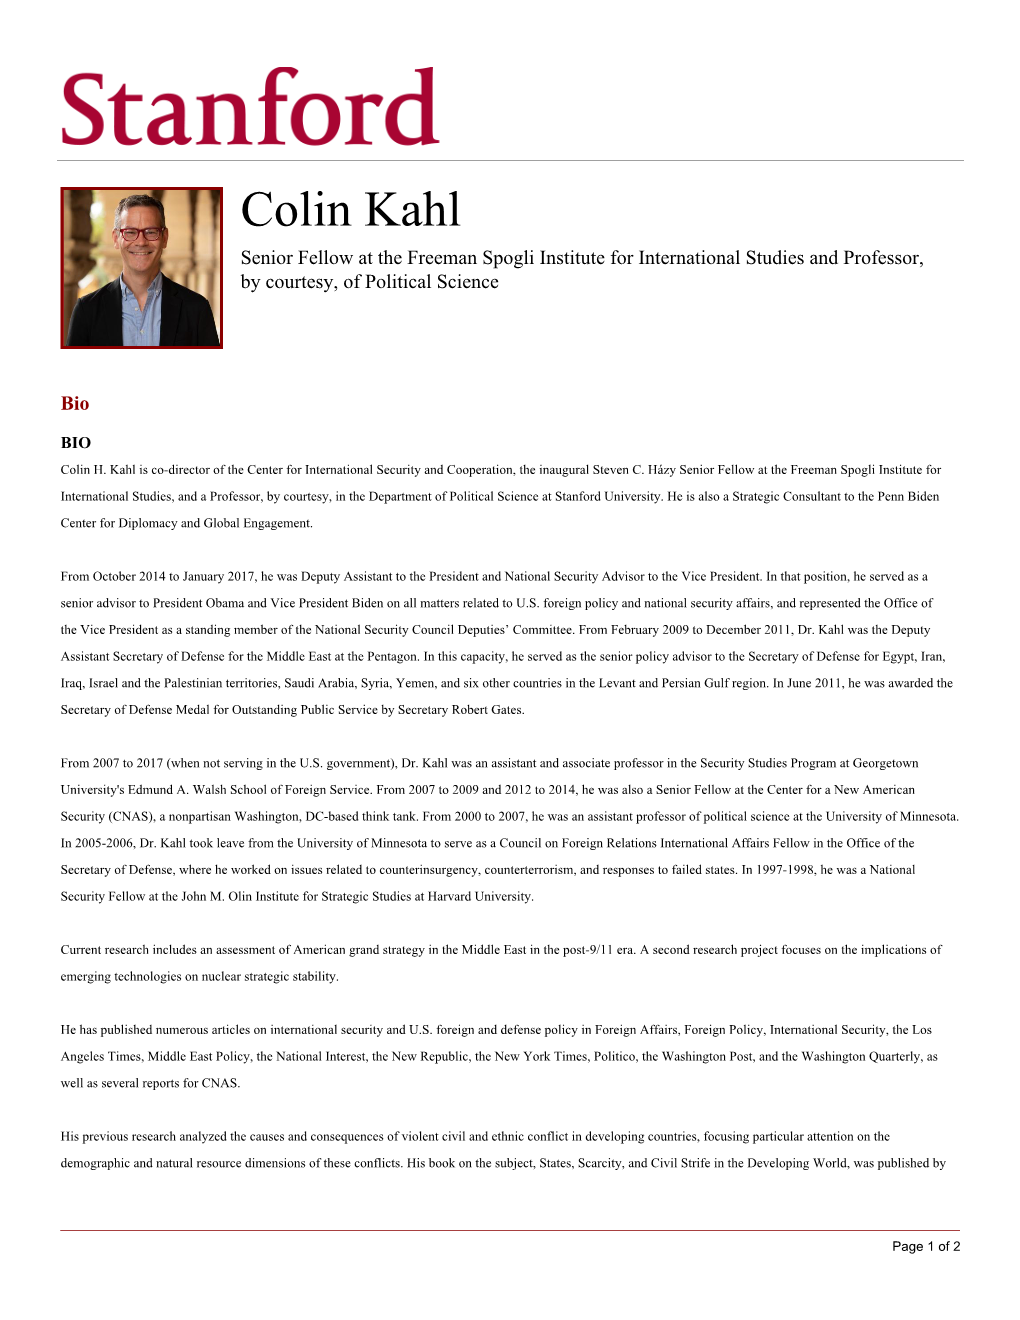 Colin Kahl Senior Fellow at the Freeman Spogli Institute for International Studies and Professor, by Courtesy, of Political Science